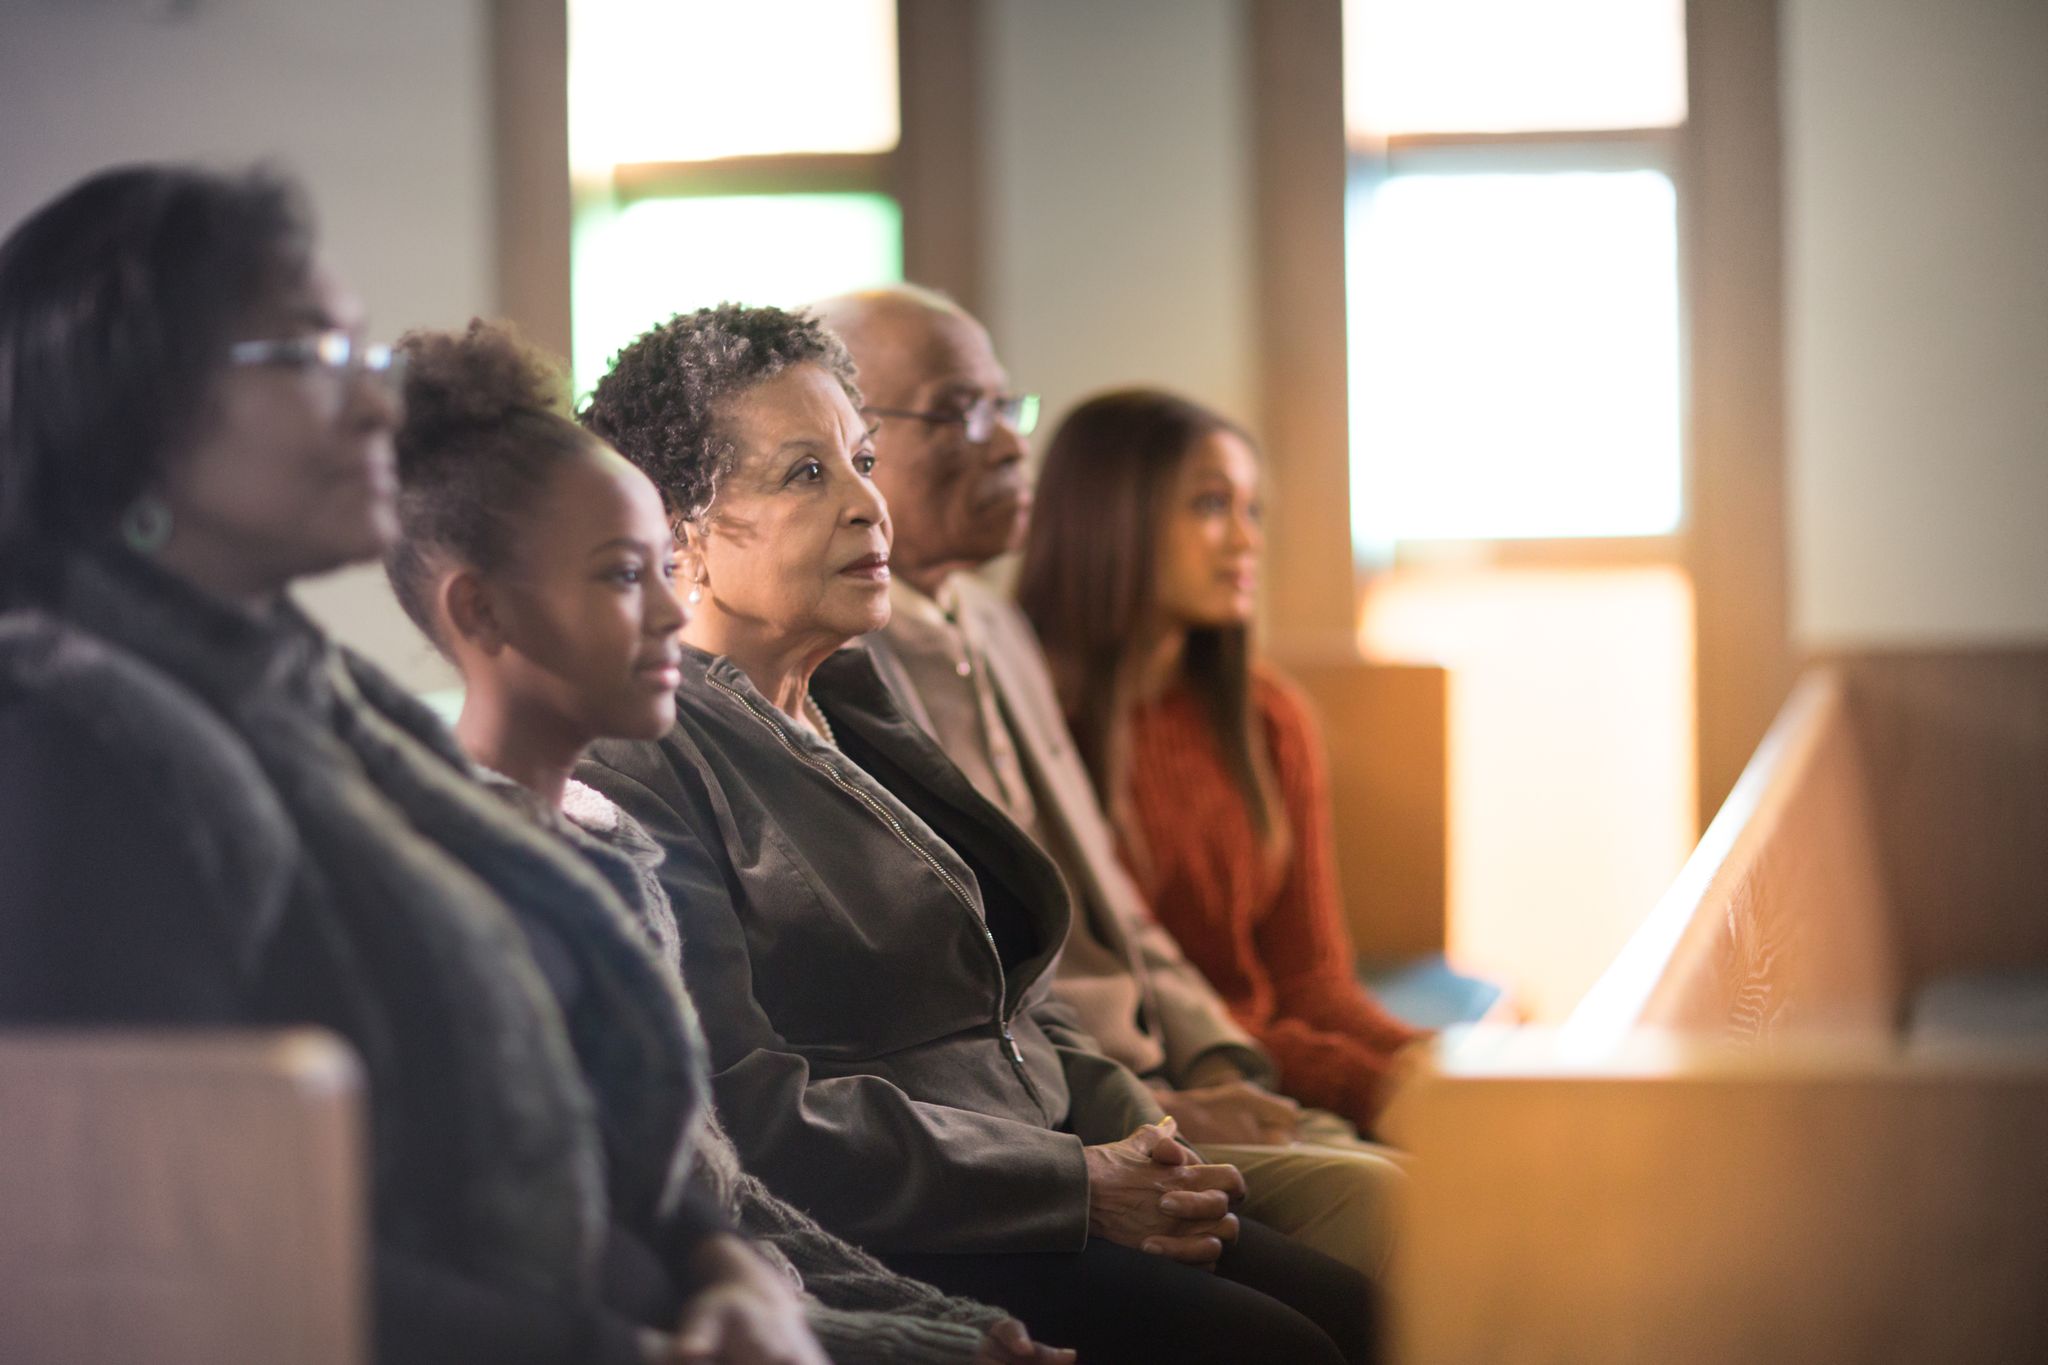 family sits together in church pew